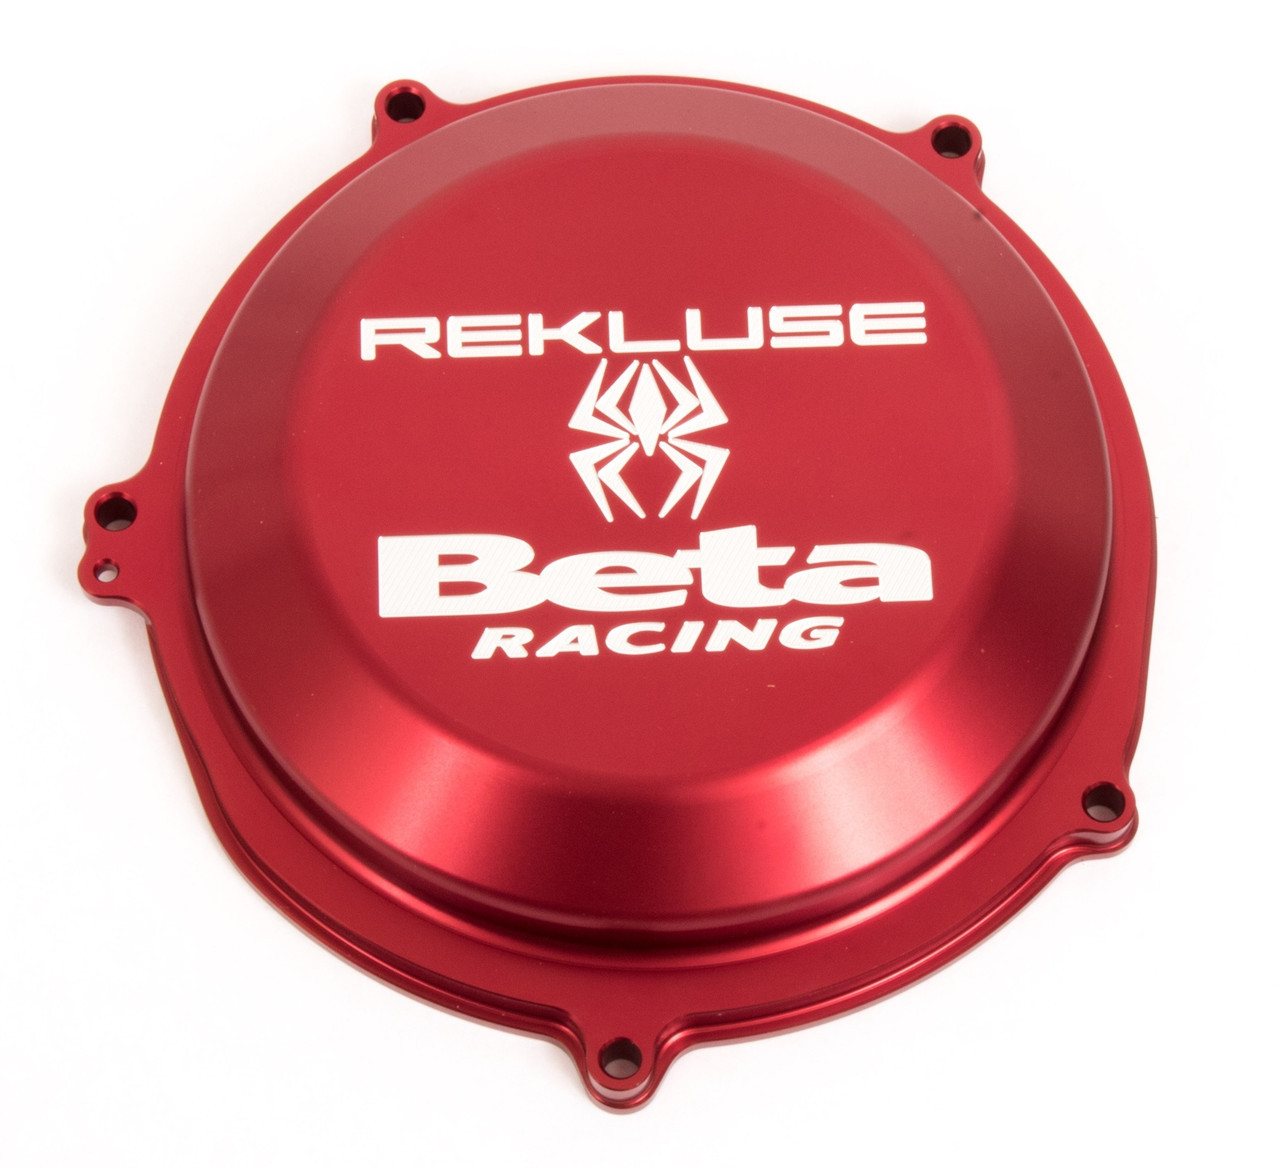 Billet Clutch Cover by Rekluse 4-Stroke, 2018/19 Billet aluminum red aluminum clutch cover Thicker and stronger than stock cover Beta Racing and Rekluse machined onto the cover Works with both stock and Rekluse clutches